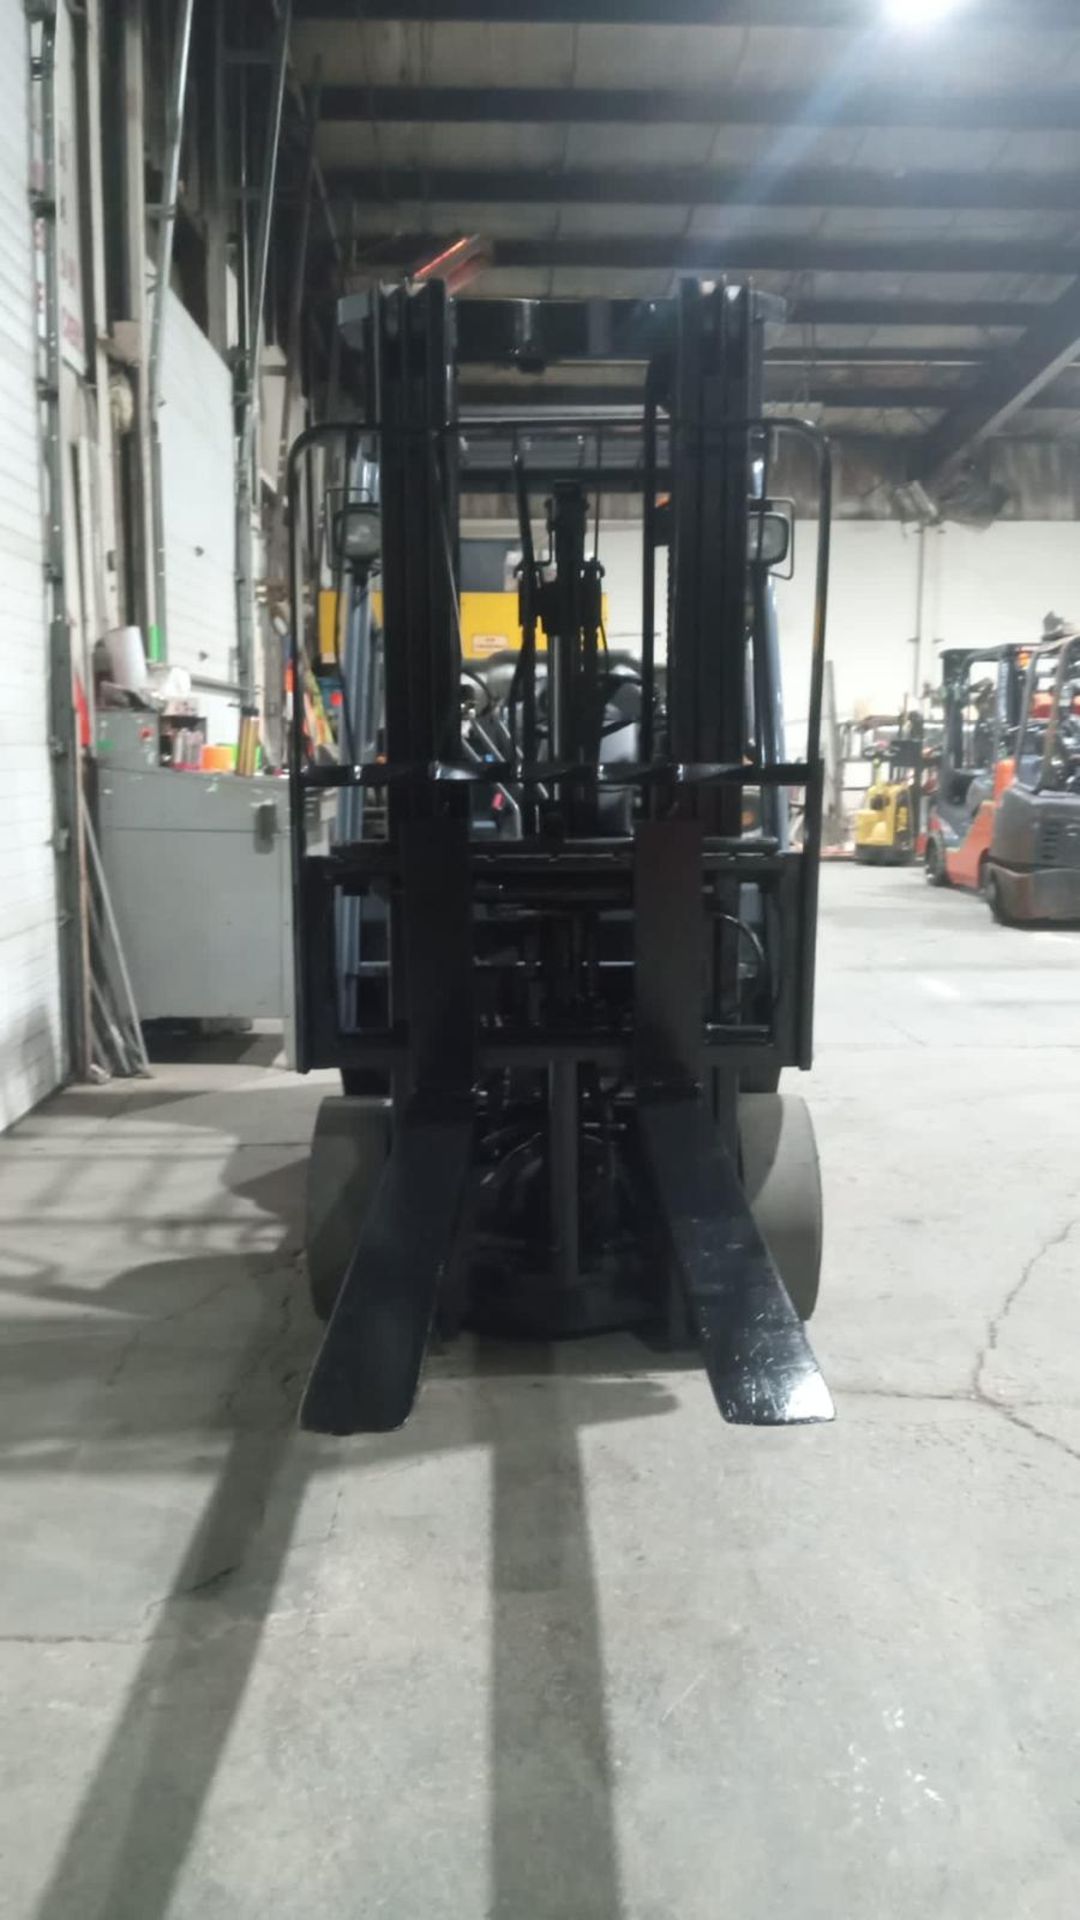 2018 TOYOTA 5,000lbs Capacity LPG (Propane) Forklift indoor with sideshift and 3-STAGE MAST - Image 4 of 4